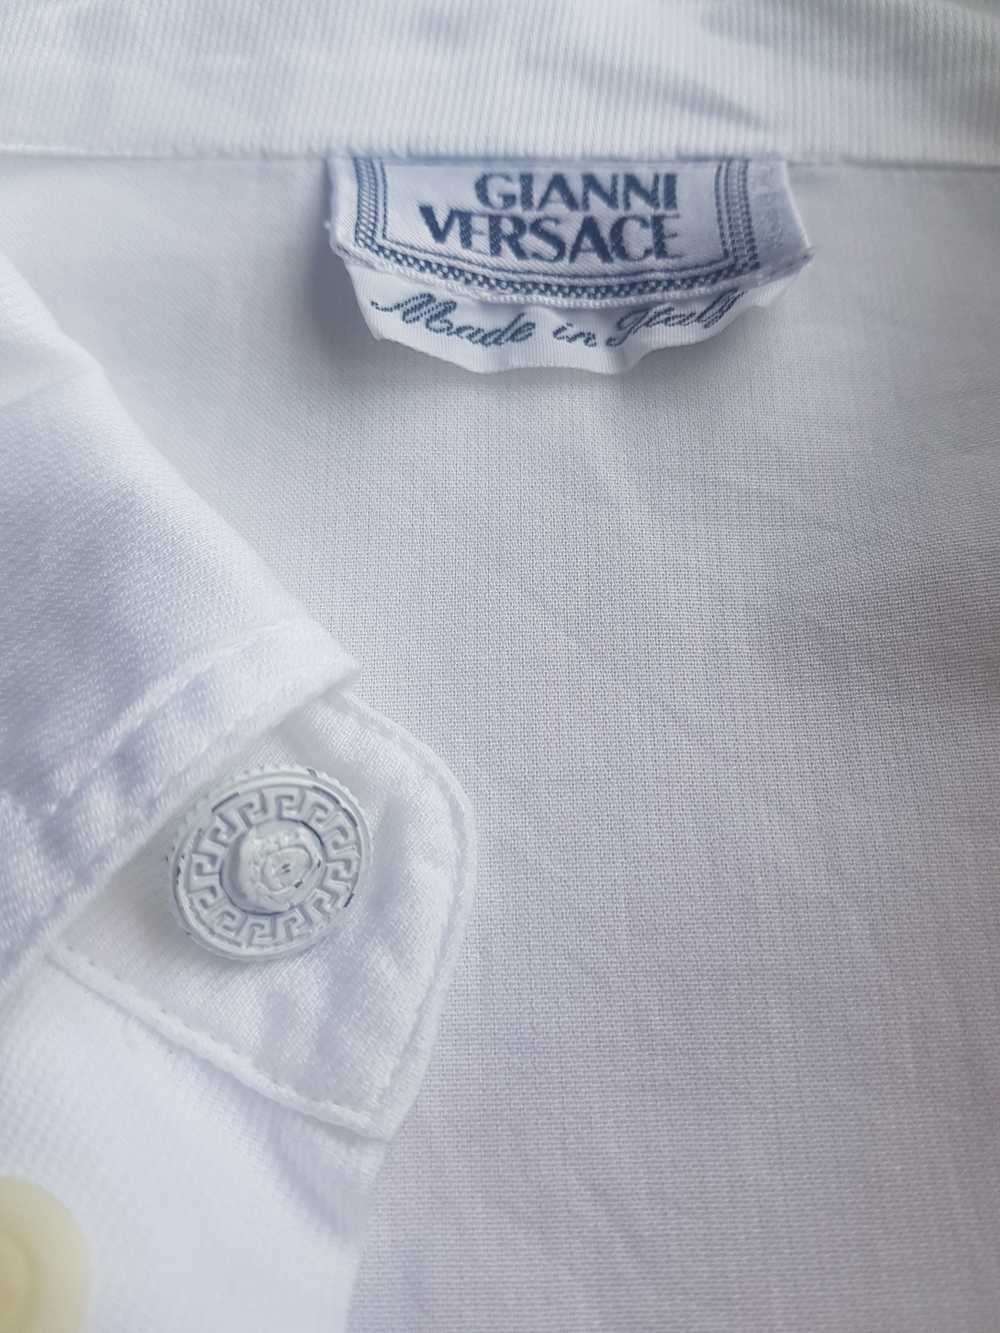 Versace GIANNI VERSACE Vintage 90s Auth Shirt Whi… - image 6